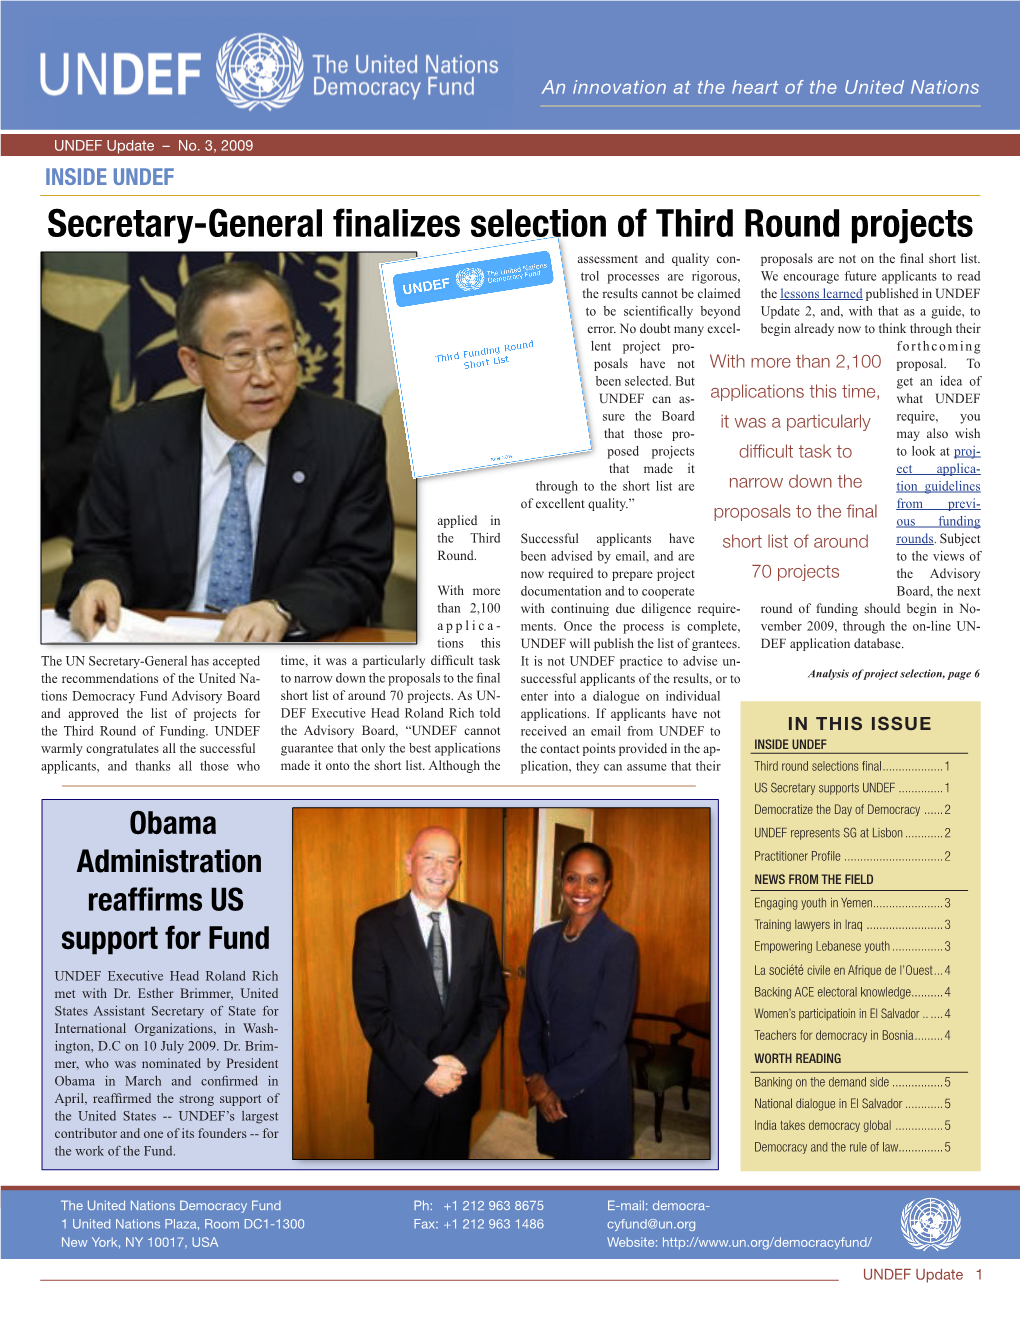 Secretary-General Finalizes Selection of Third Round Projects Assessment and Quality Con- Proposals Are Not on the Final Short List